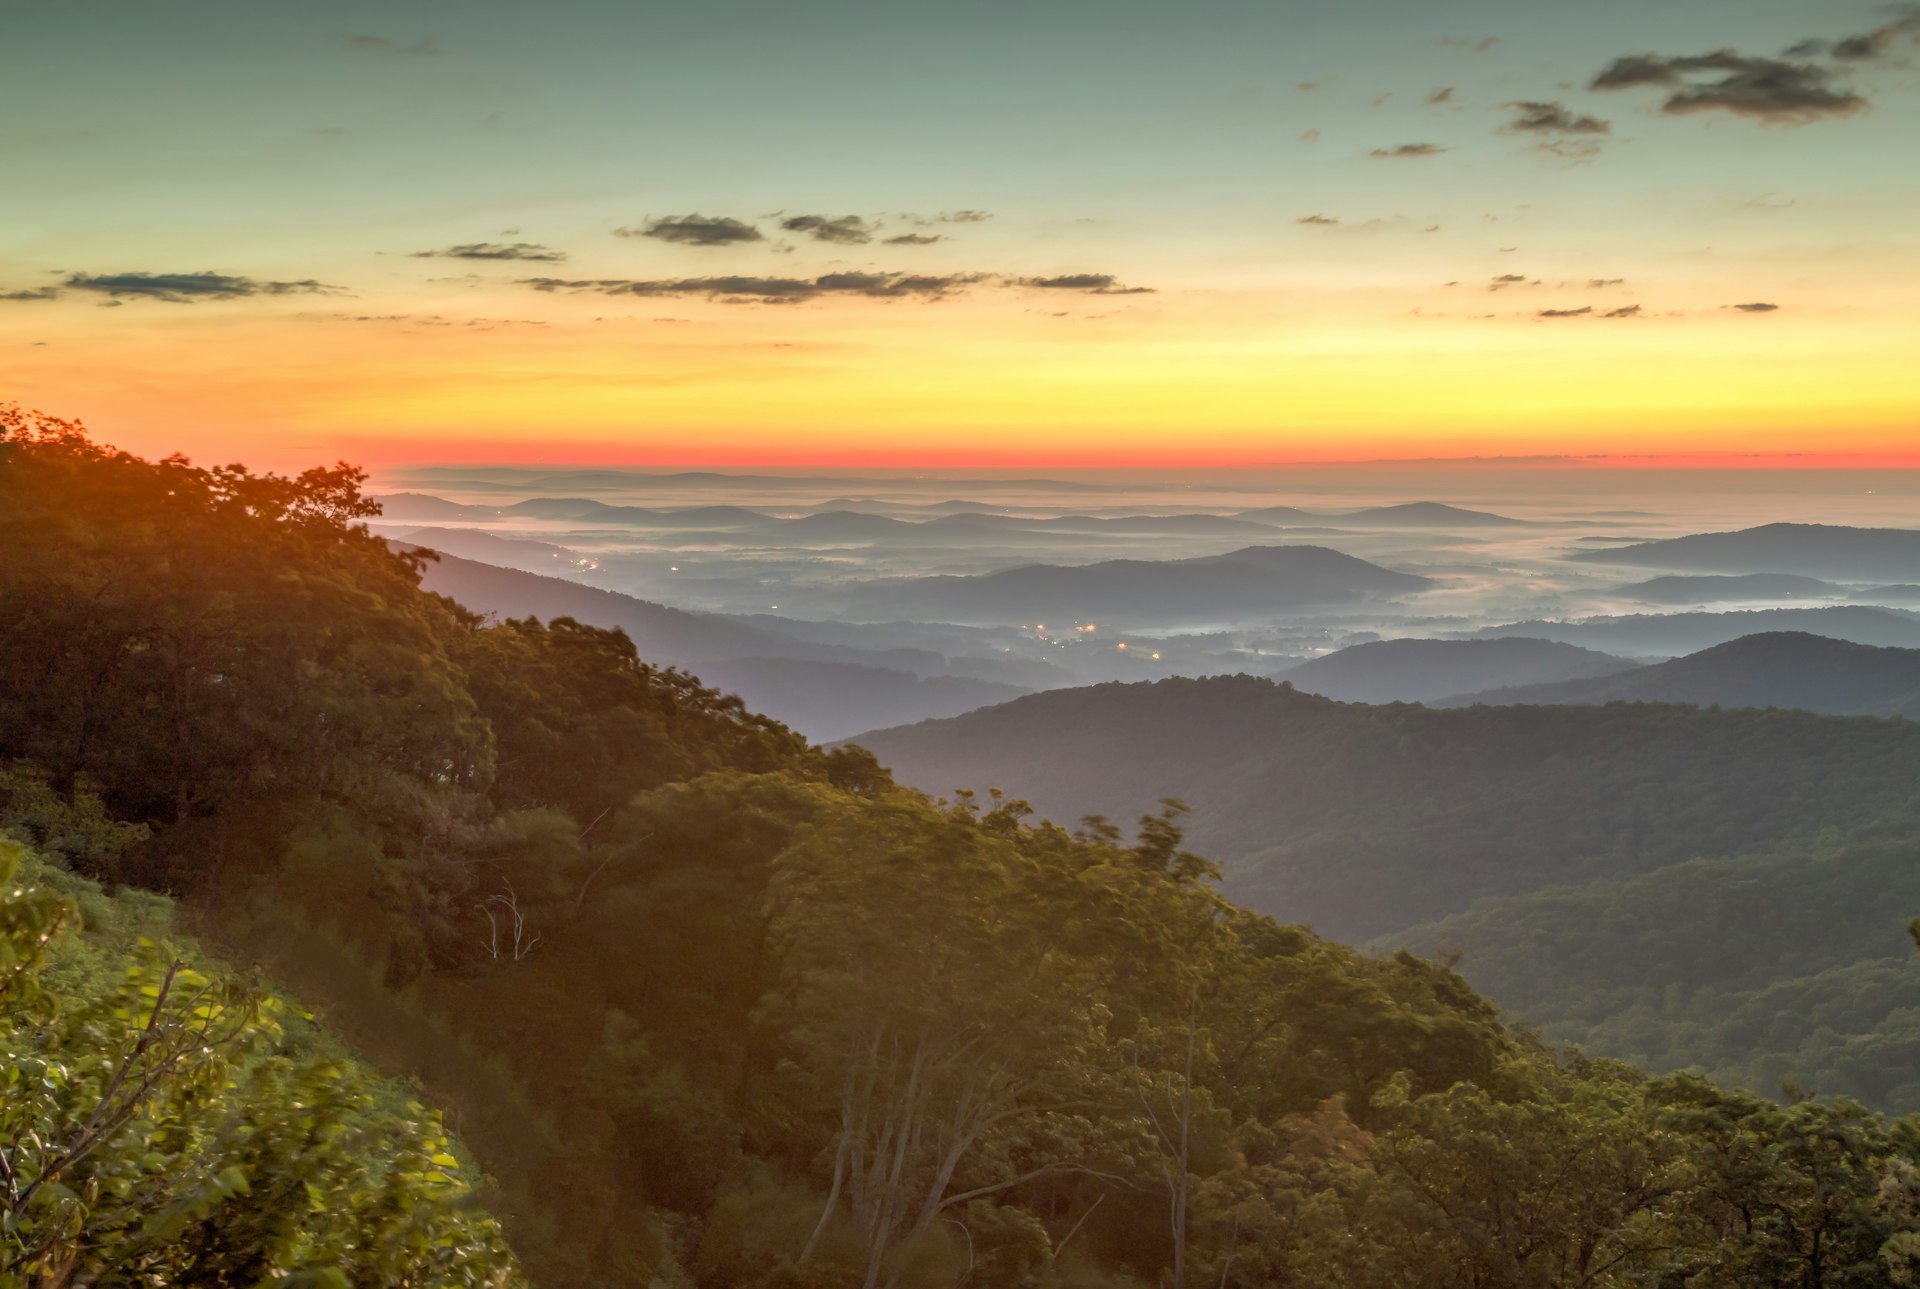 The Blue Ridge Mountains at twilight, as seen from Skyline Drive in Shenandoah National Park.